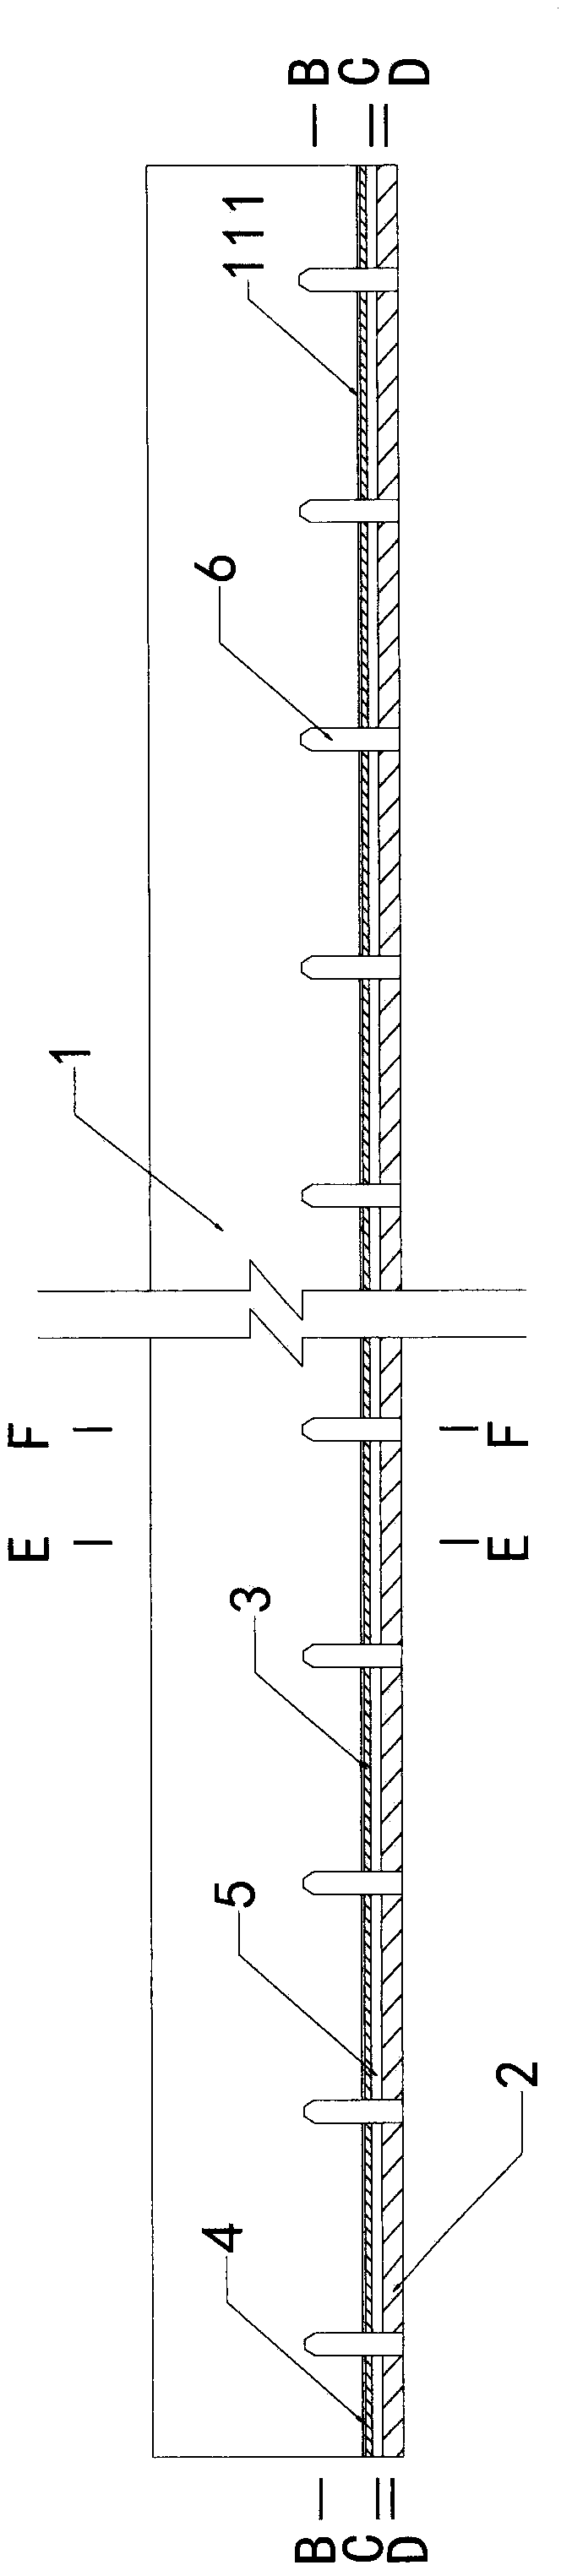 A method for compositely strengthening wooden beams